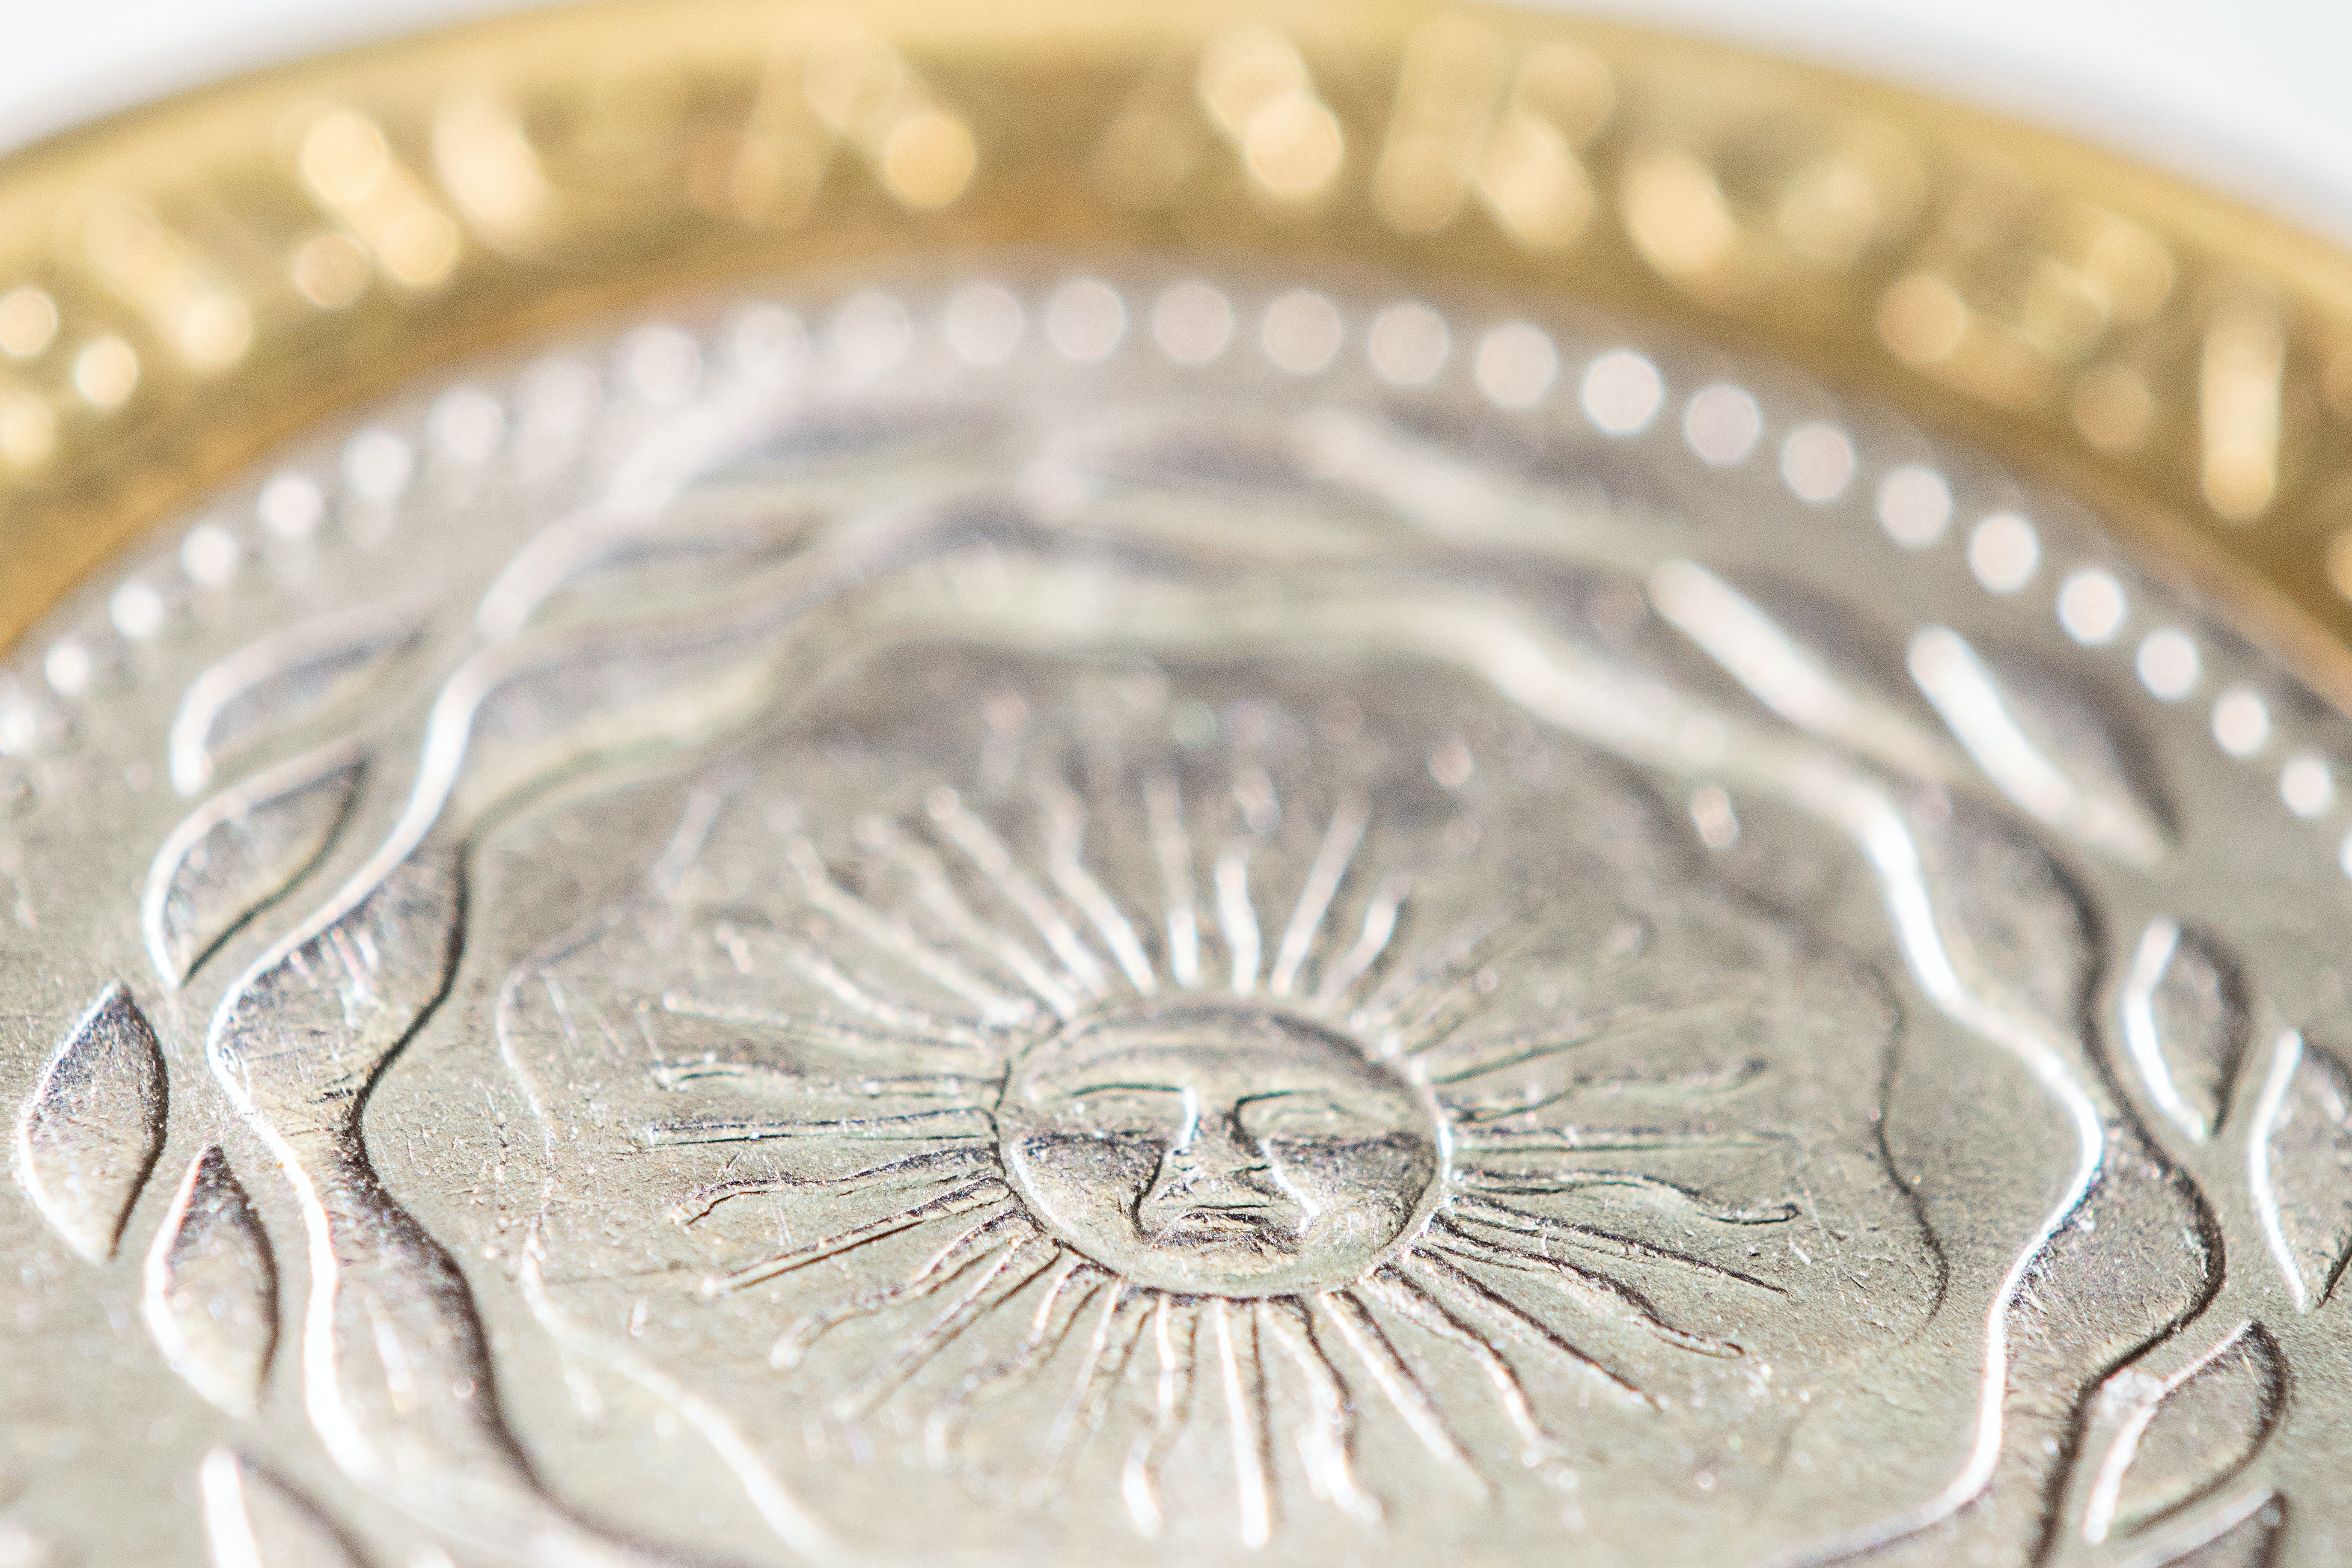 How Can Precious Metals Potentially Protect Assets Against Economic Uncertainty?